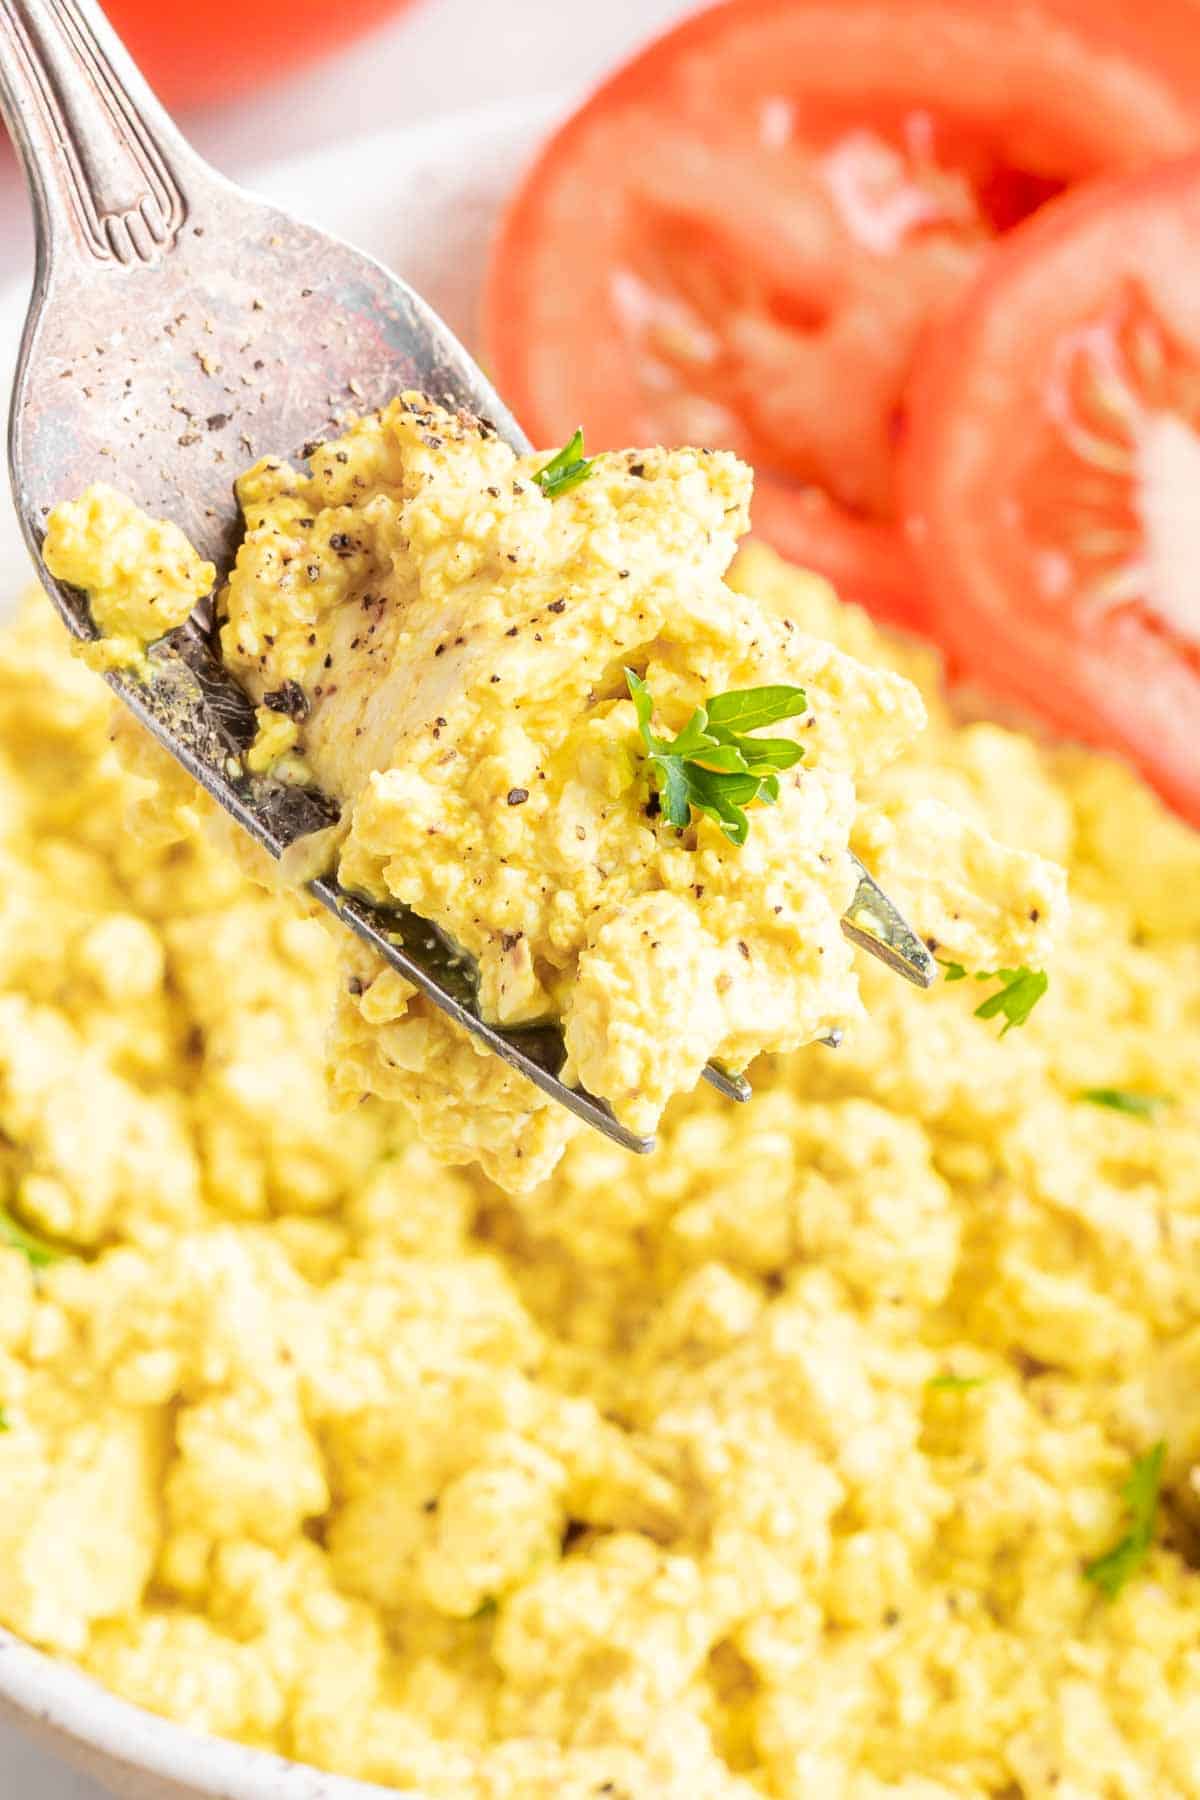 close up bite of the vegan scrambled eggs with a garnish of parsley and tomato slices